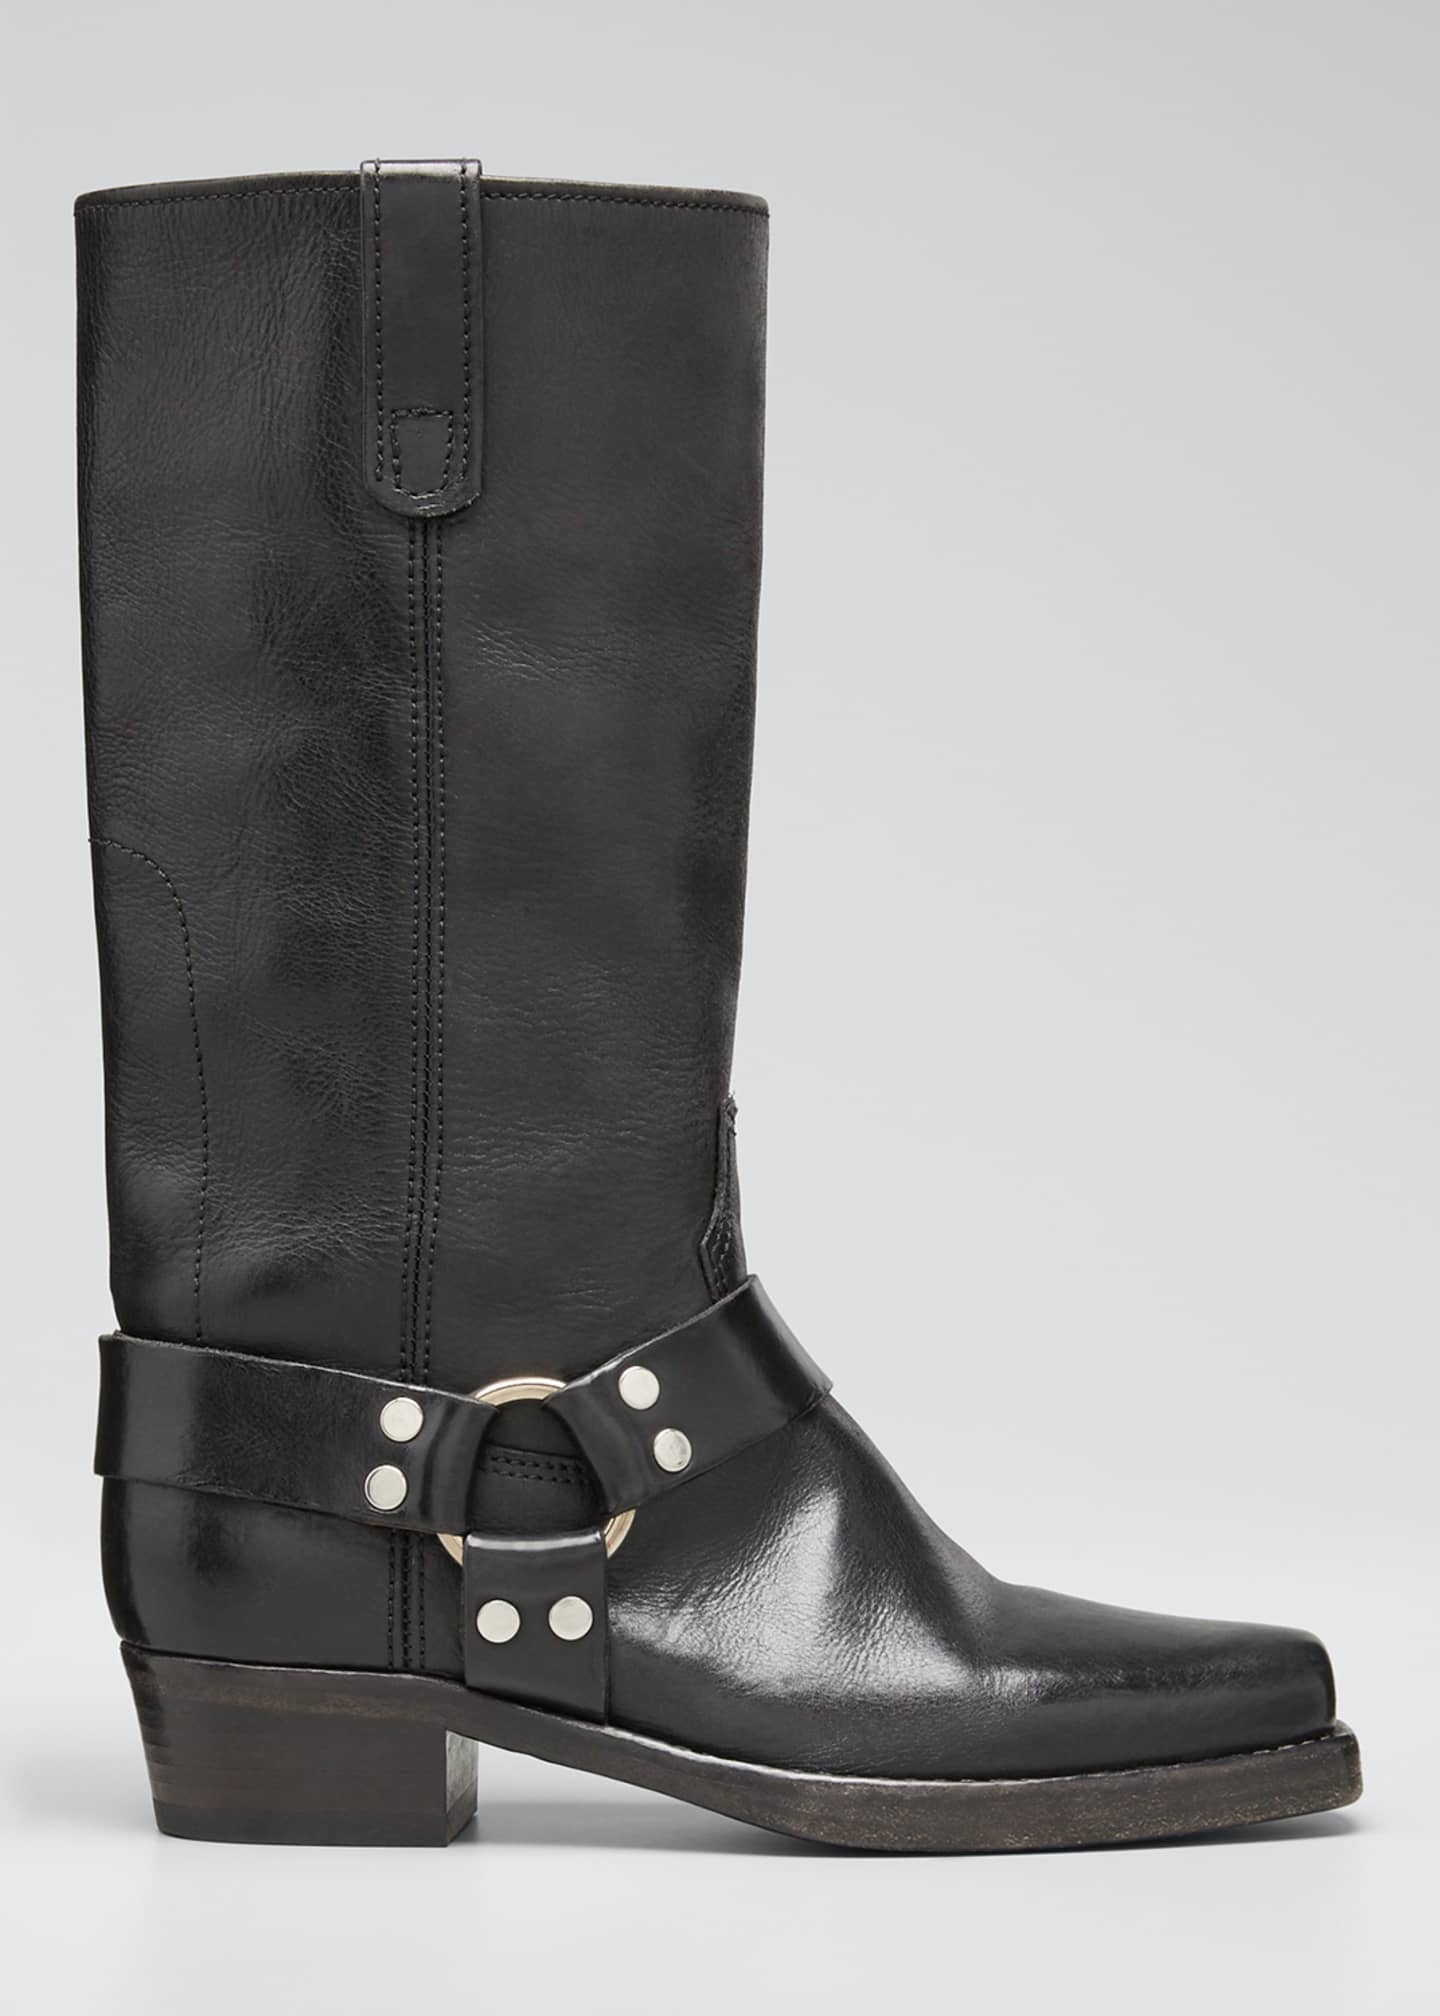 RE/DONE Calvary Harness Tall Boots - Bergdorf Goodman